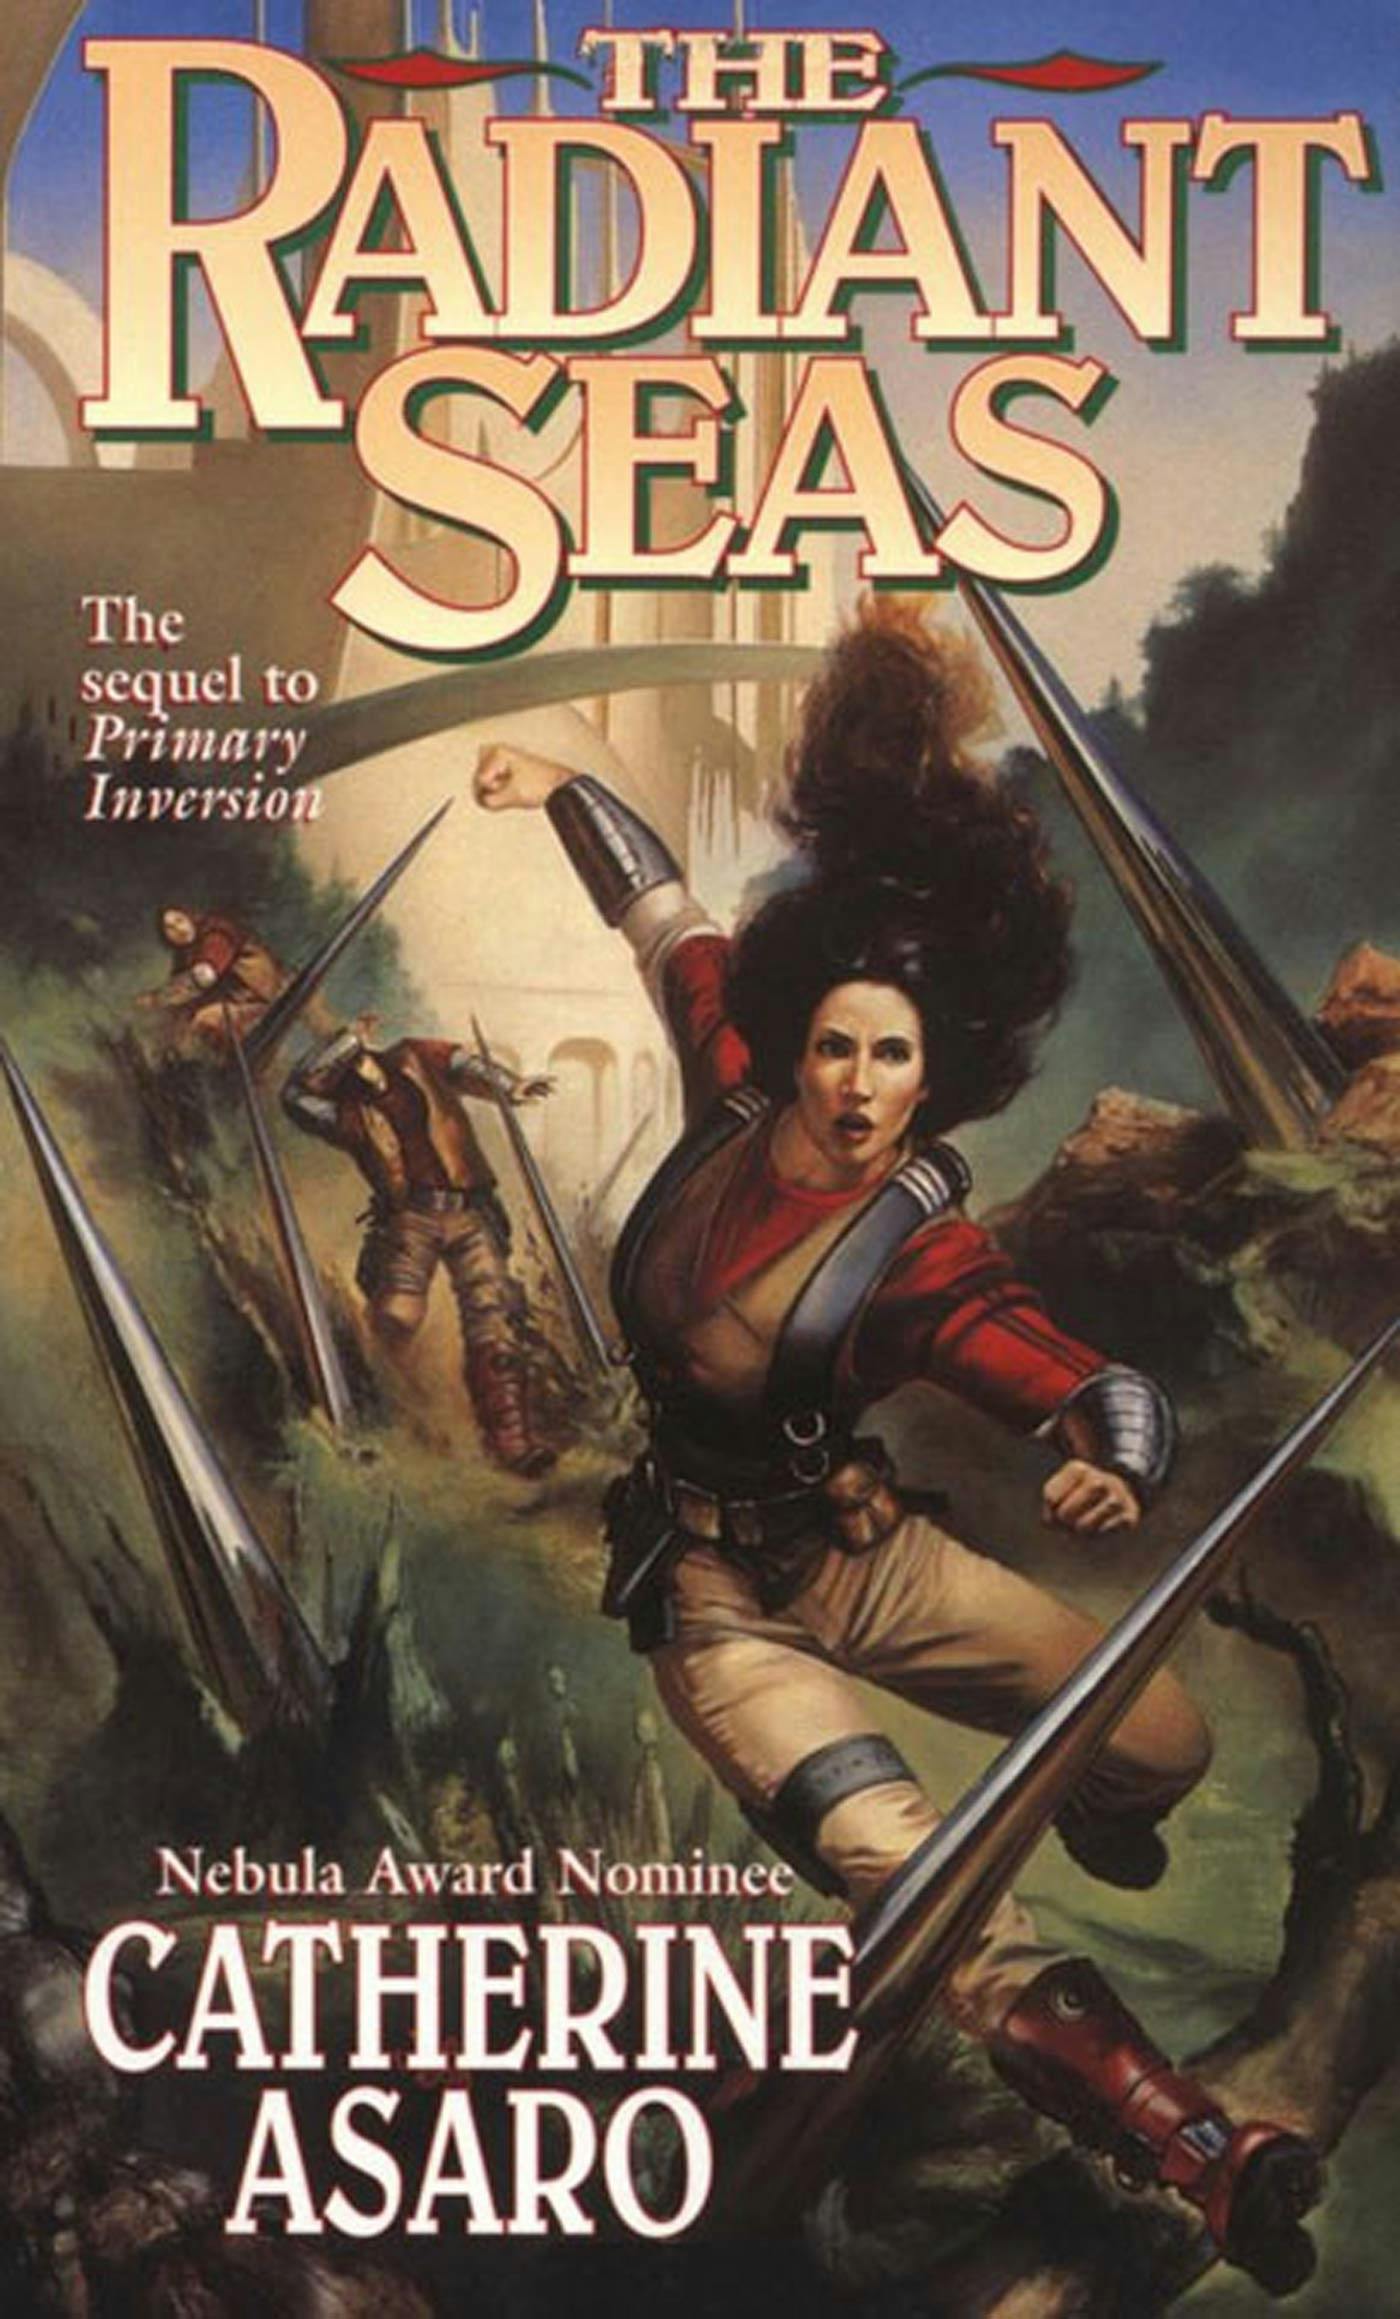 Cover for the book titled as: The Radiant Seas